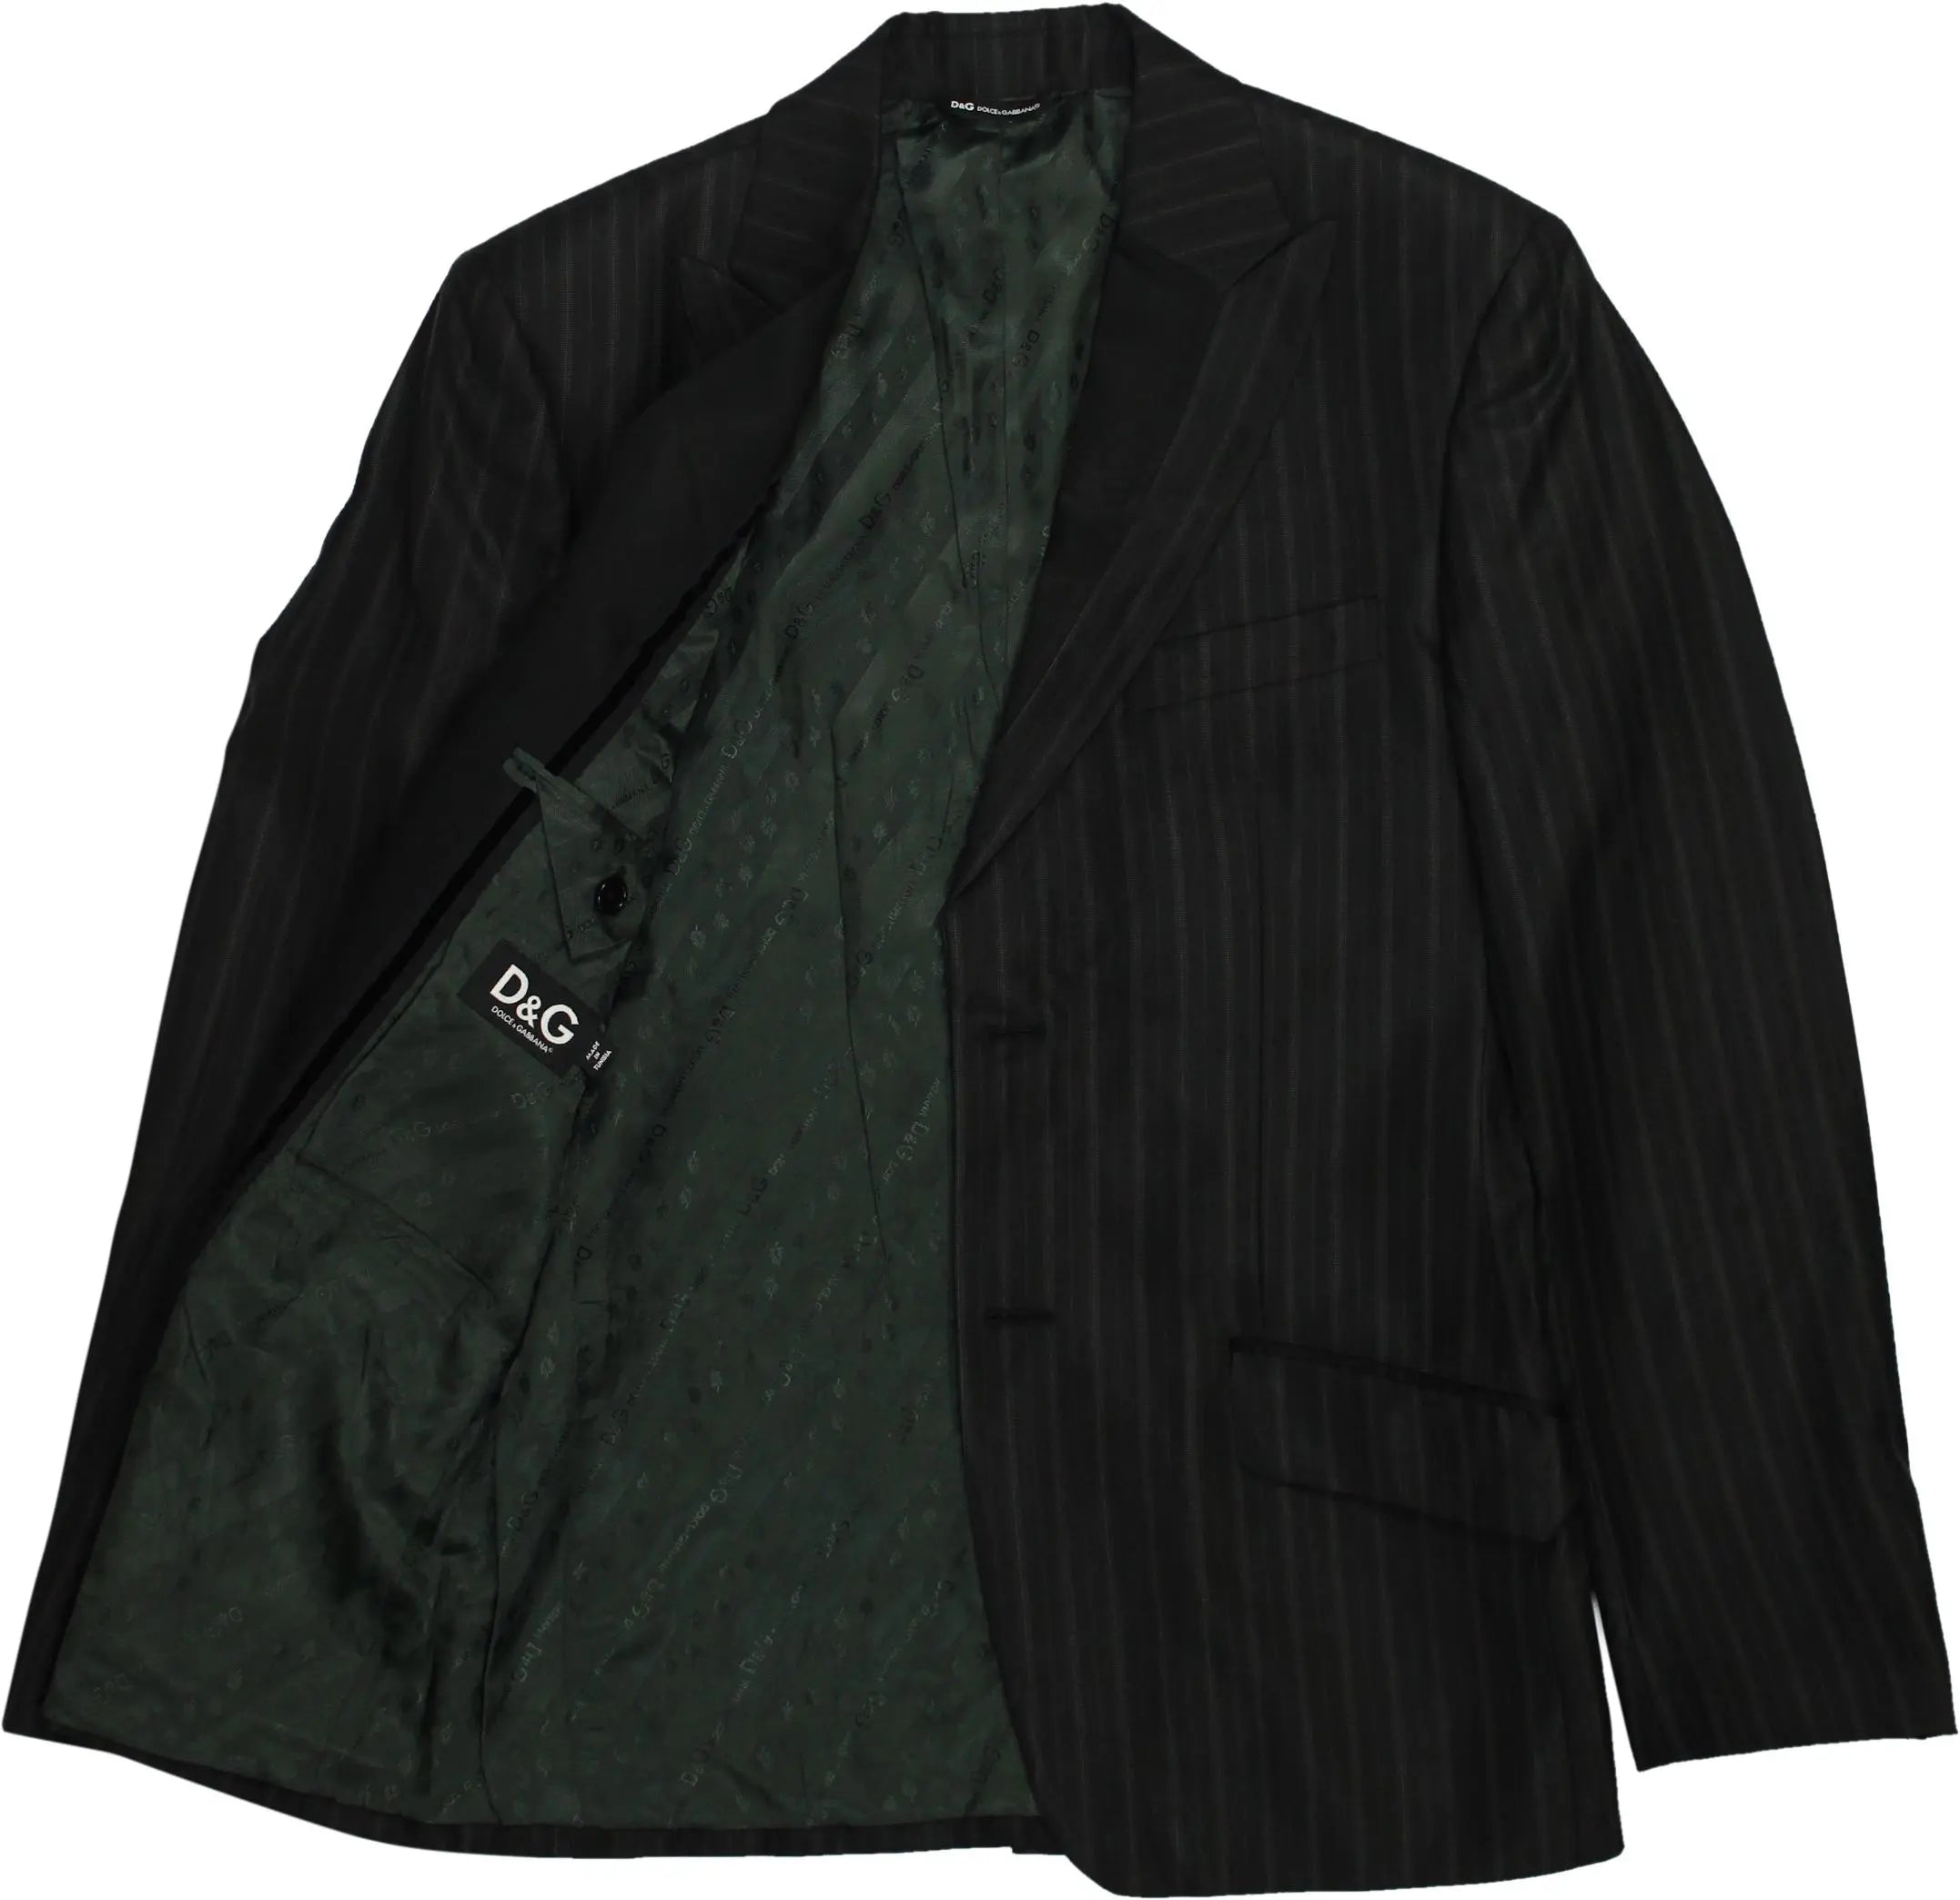 Dolce & Gabbana - Striped Black Blazer by Dolce & Gabanna- ThriftTale.com - Vintage and second handclothing